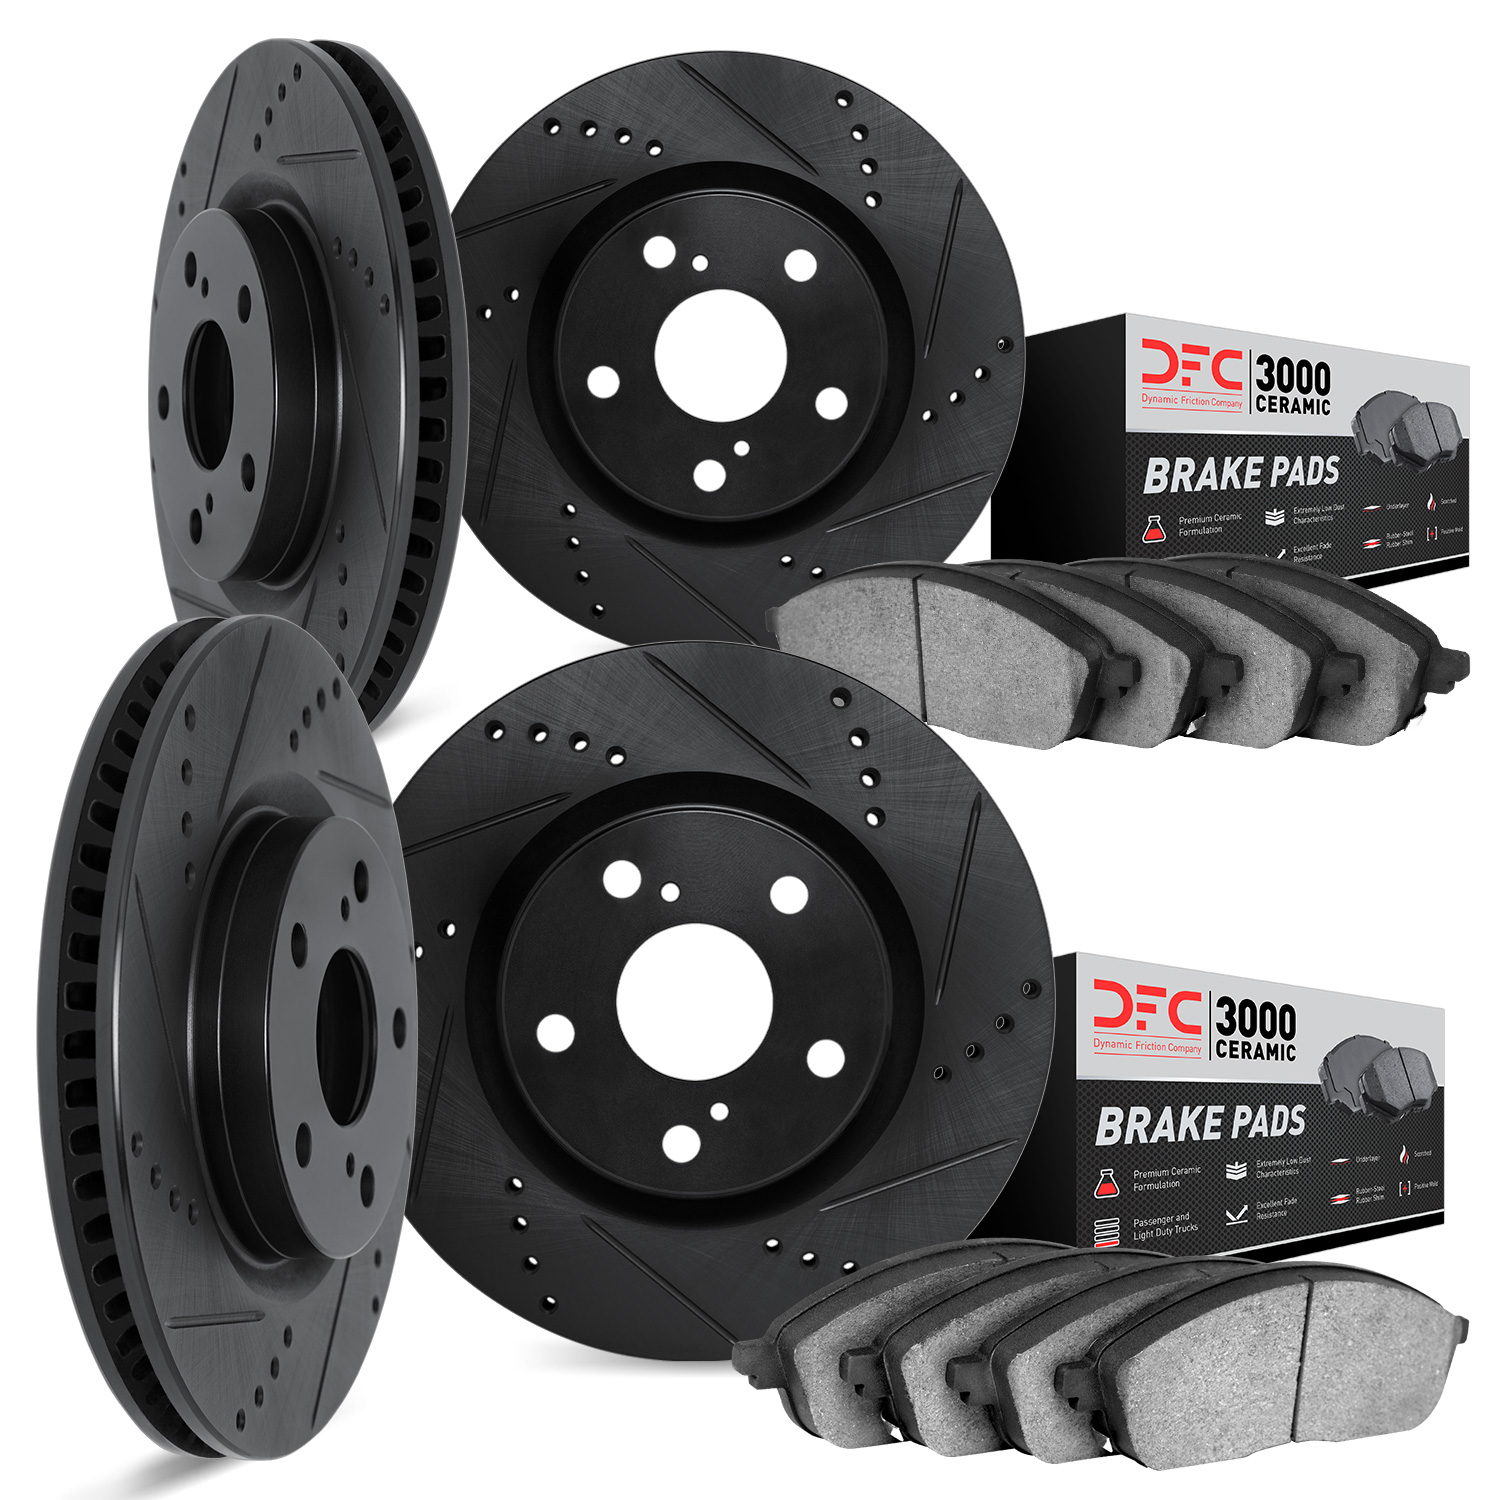 8304-31053 Drilled/Slotted Brake Rotors with 3000-Series Ceramic Brake Pads Kit [Black], 2011-2016 BMW, Position: Front and Rear